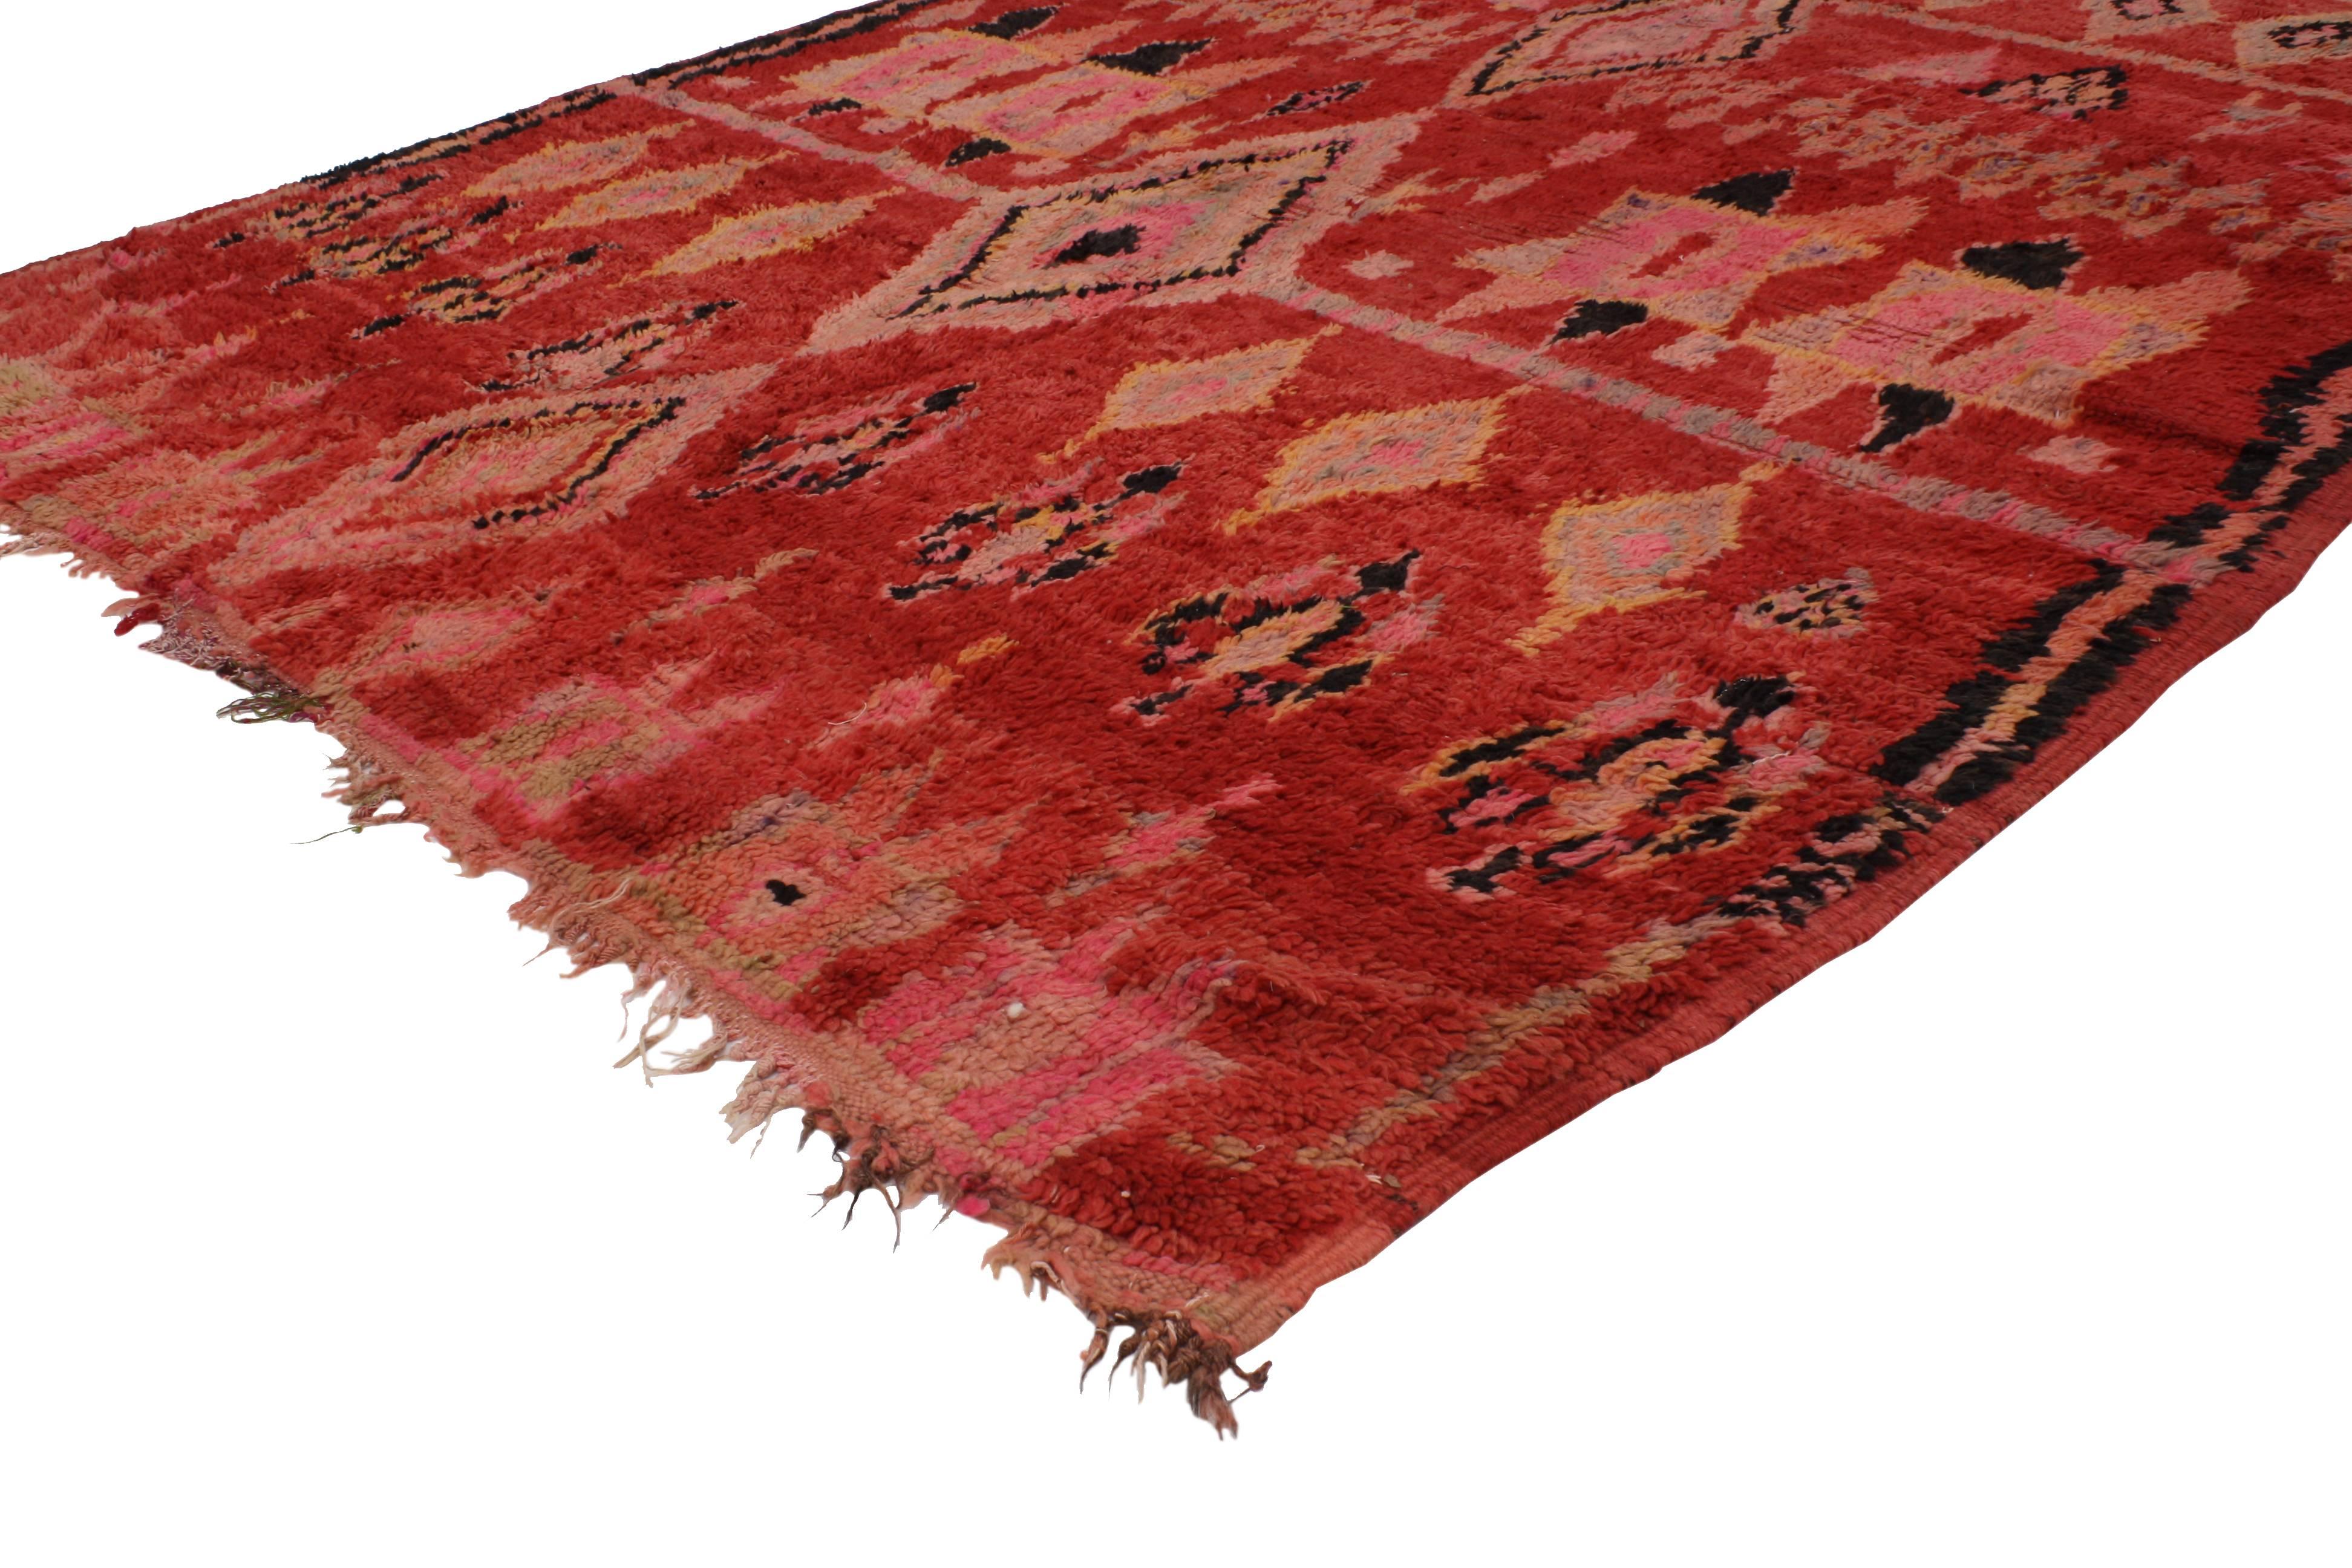 20376 Vintage Berber Red Moroccan Rug with Modern Tribal Design and Star of Solomon. Color, style and plush pile, this Mid-Century Modern vintage Berber Moroccan rug has it all. This Moroccan rug is heavily ornamented by the shape of a diamond,